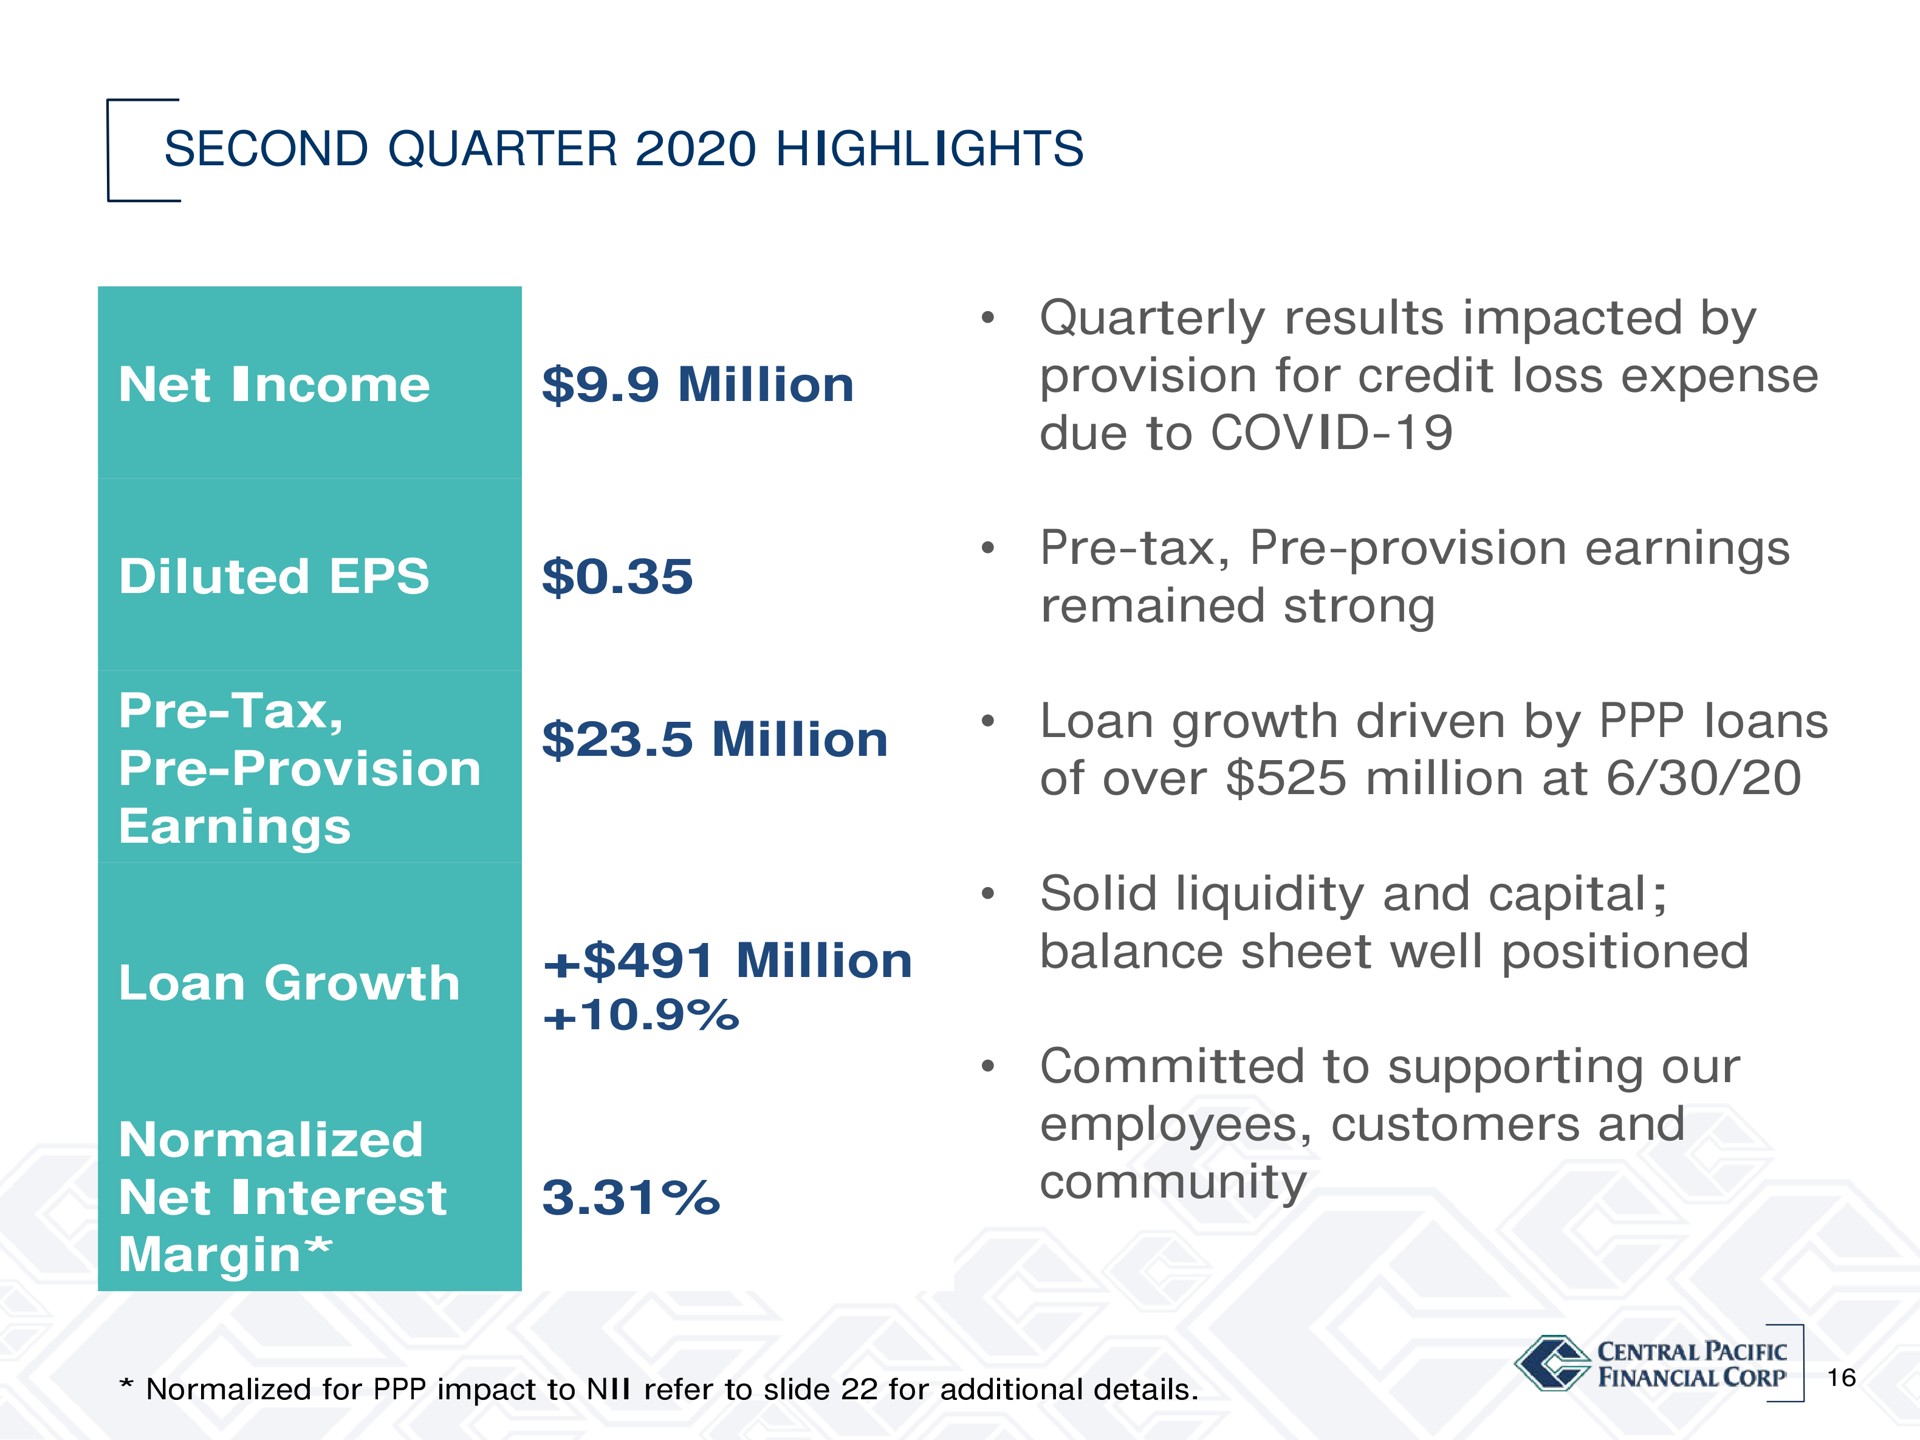 second quarter highlights net income million diluted quarterly results impacted by provision for credit loss expense due to covid tax provision earnings remained strong tax provision earnings million loan growth driven by loans of over million at loan growth million normalized net interest margin solid liquidity and capital balance sheet well positioned committed to supporting our employees customers and community an | Central Pacific Financial